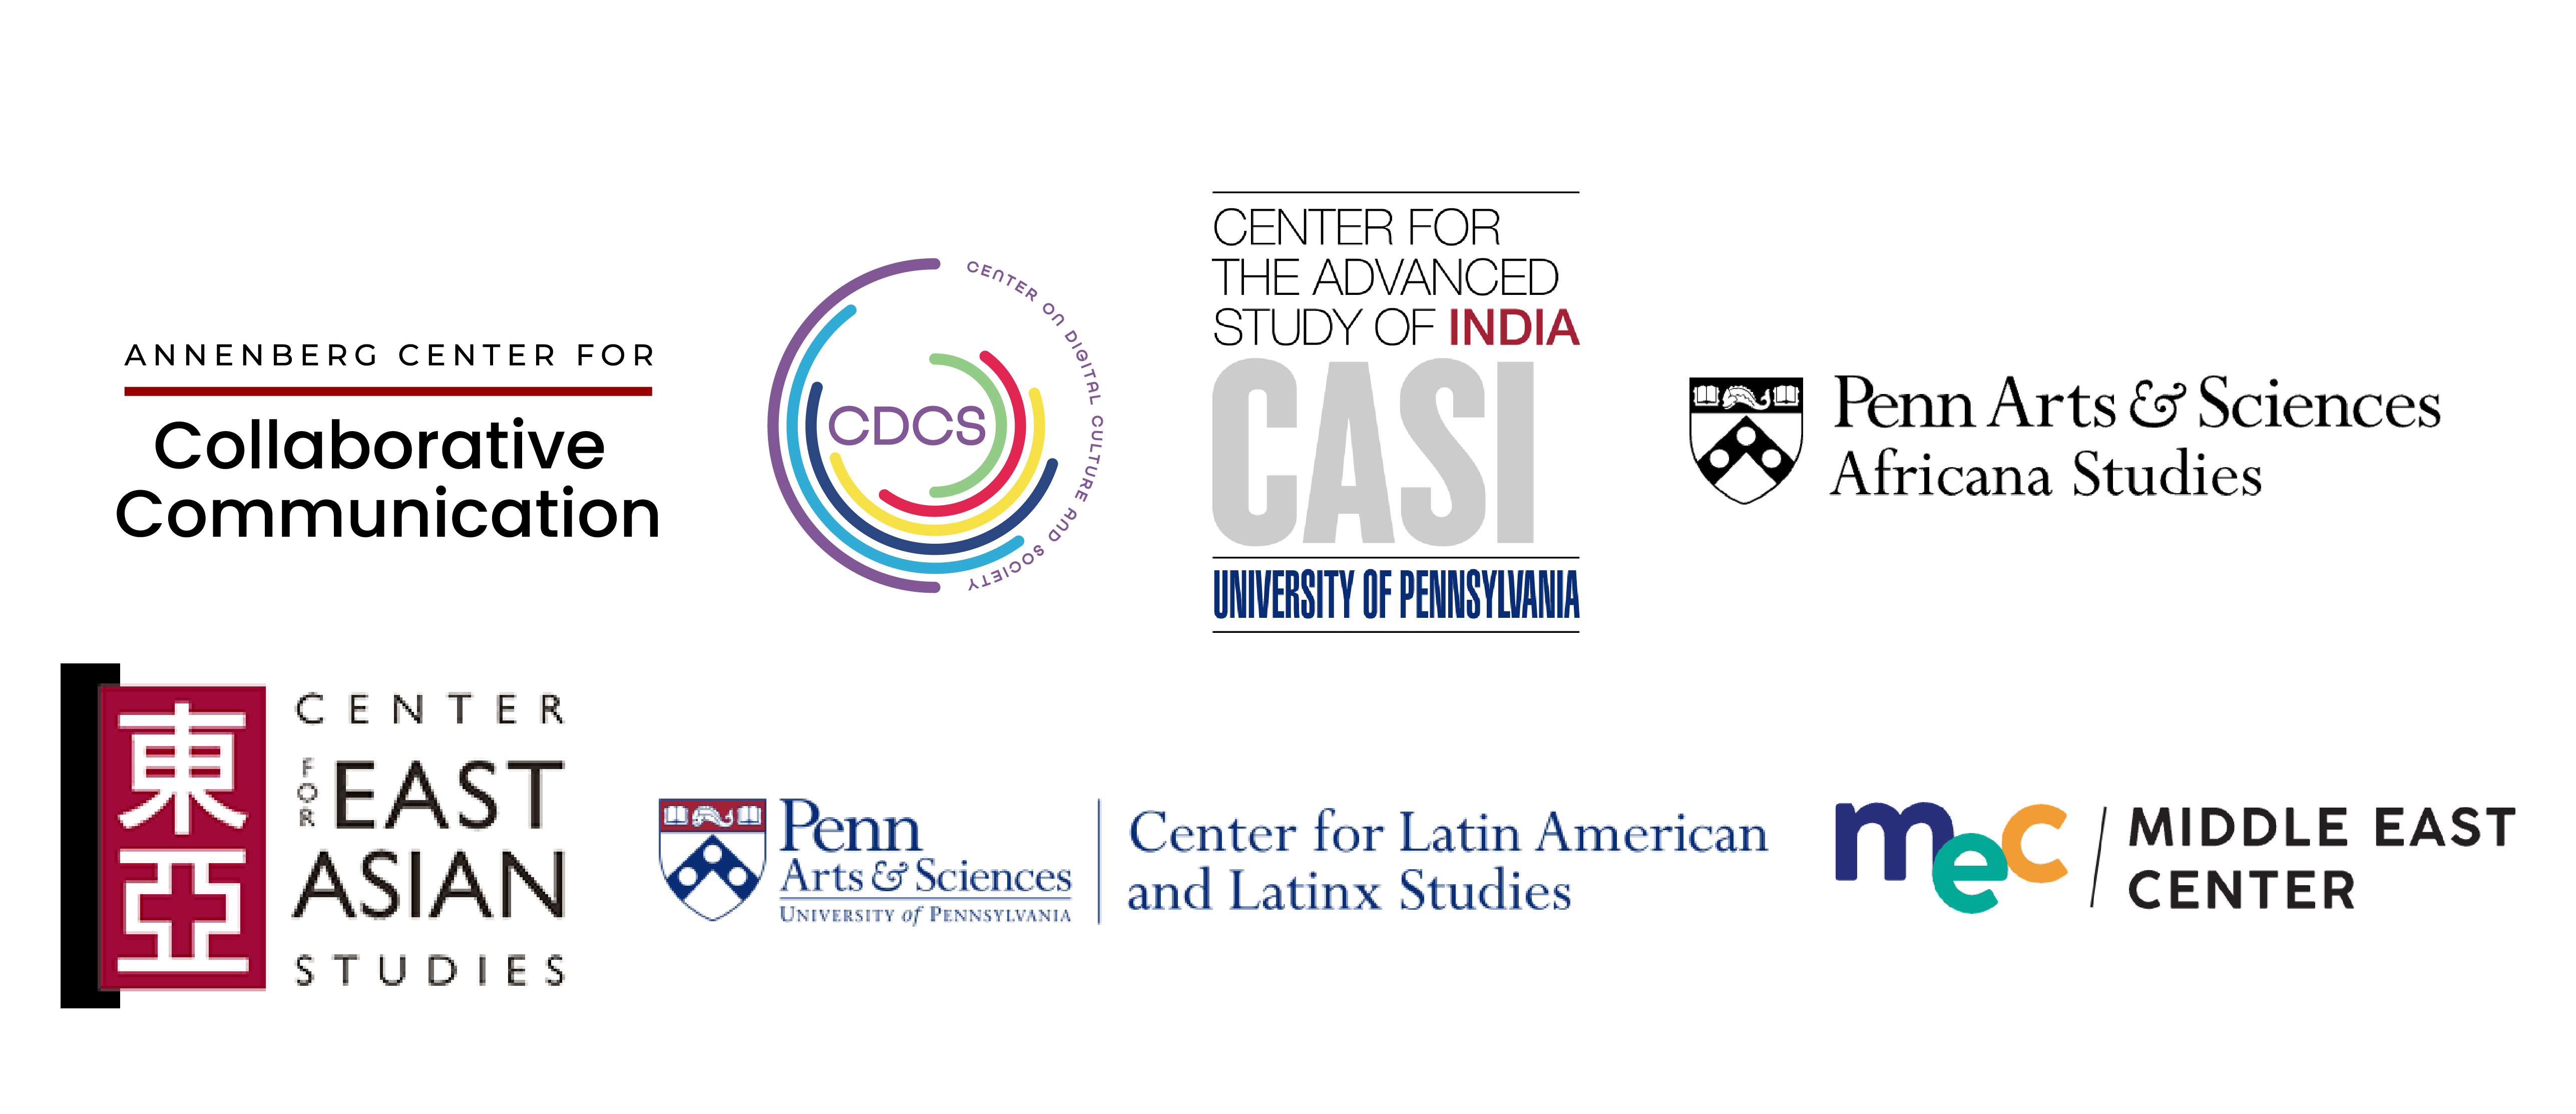 Logos for Annenberg Center for Collaborative Communication (Annenberg C3), Center on Digital Culture and Society (CDCS), Center for Advanced Study of India (CASI), Center for Africana Studies, Center for East Asian Studies (CEAS), Center for Latin American and Latinx Studies (CLALS), Middle East Center (MEC)